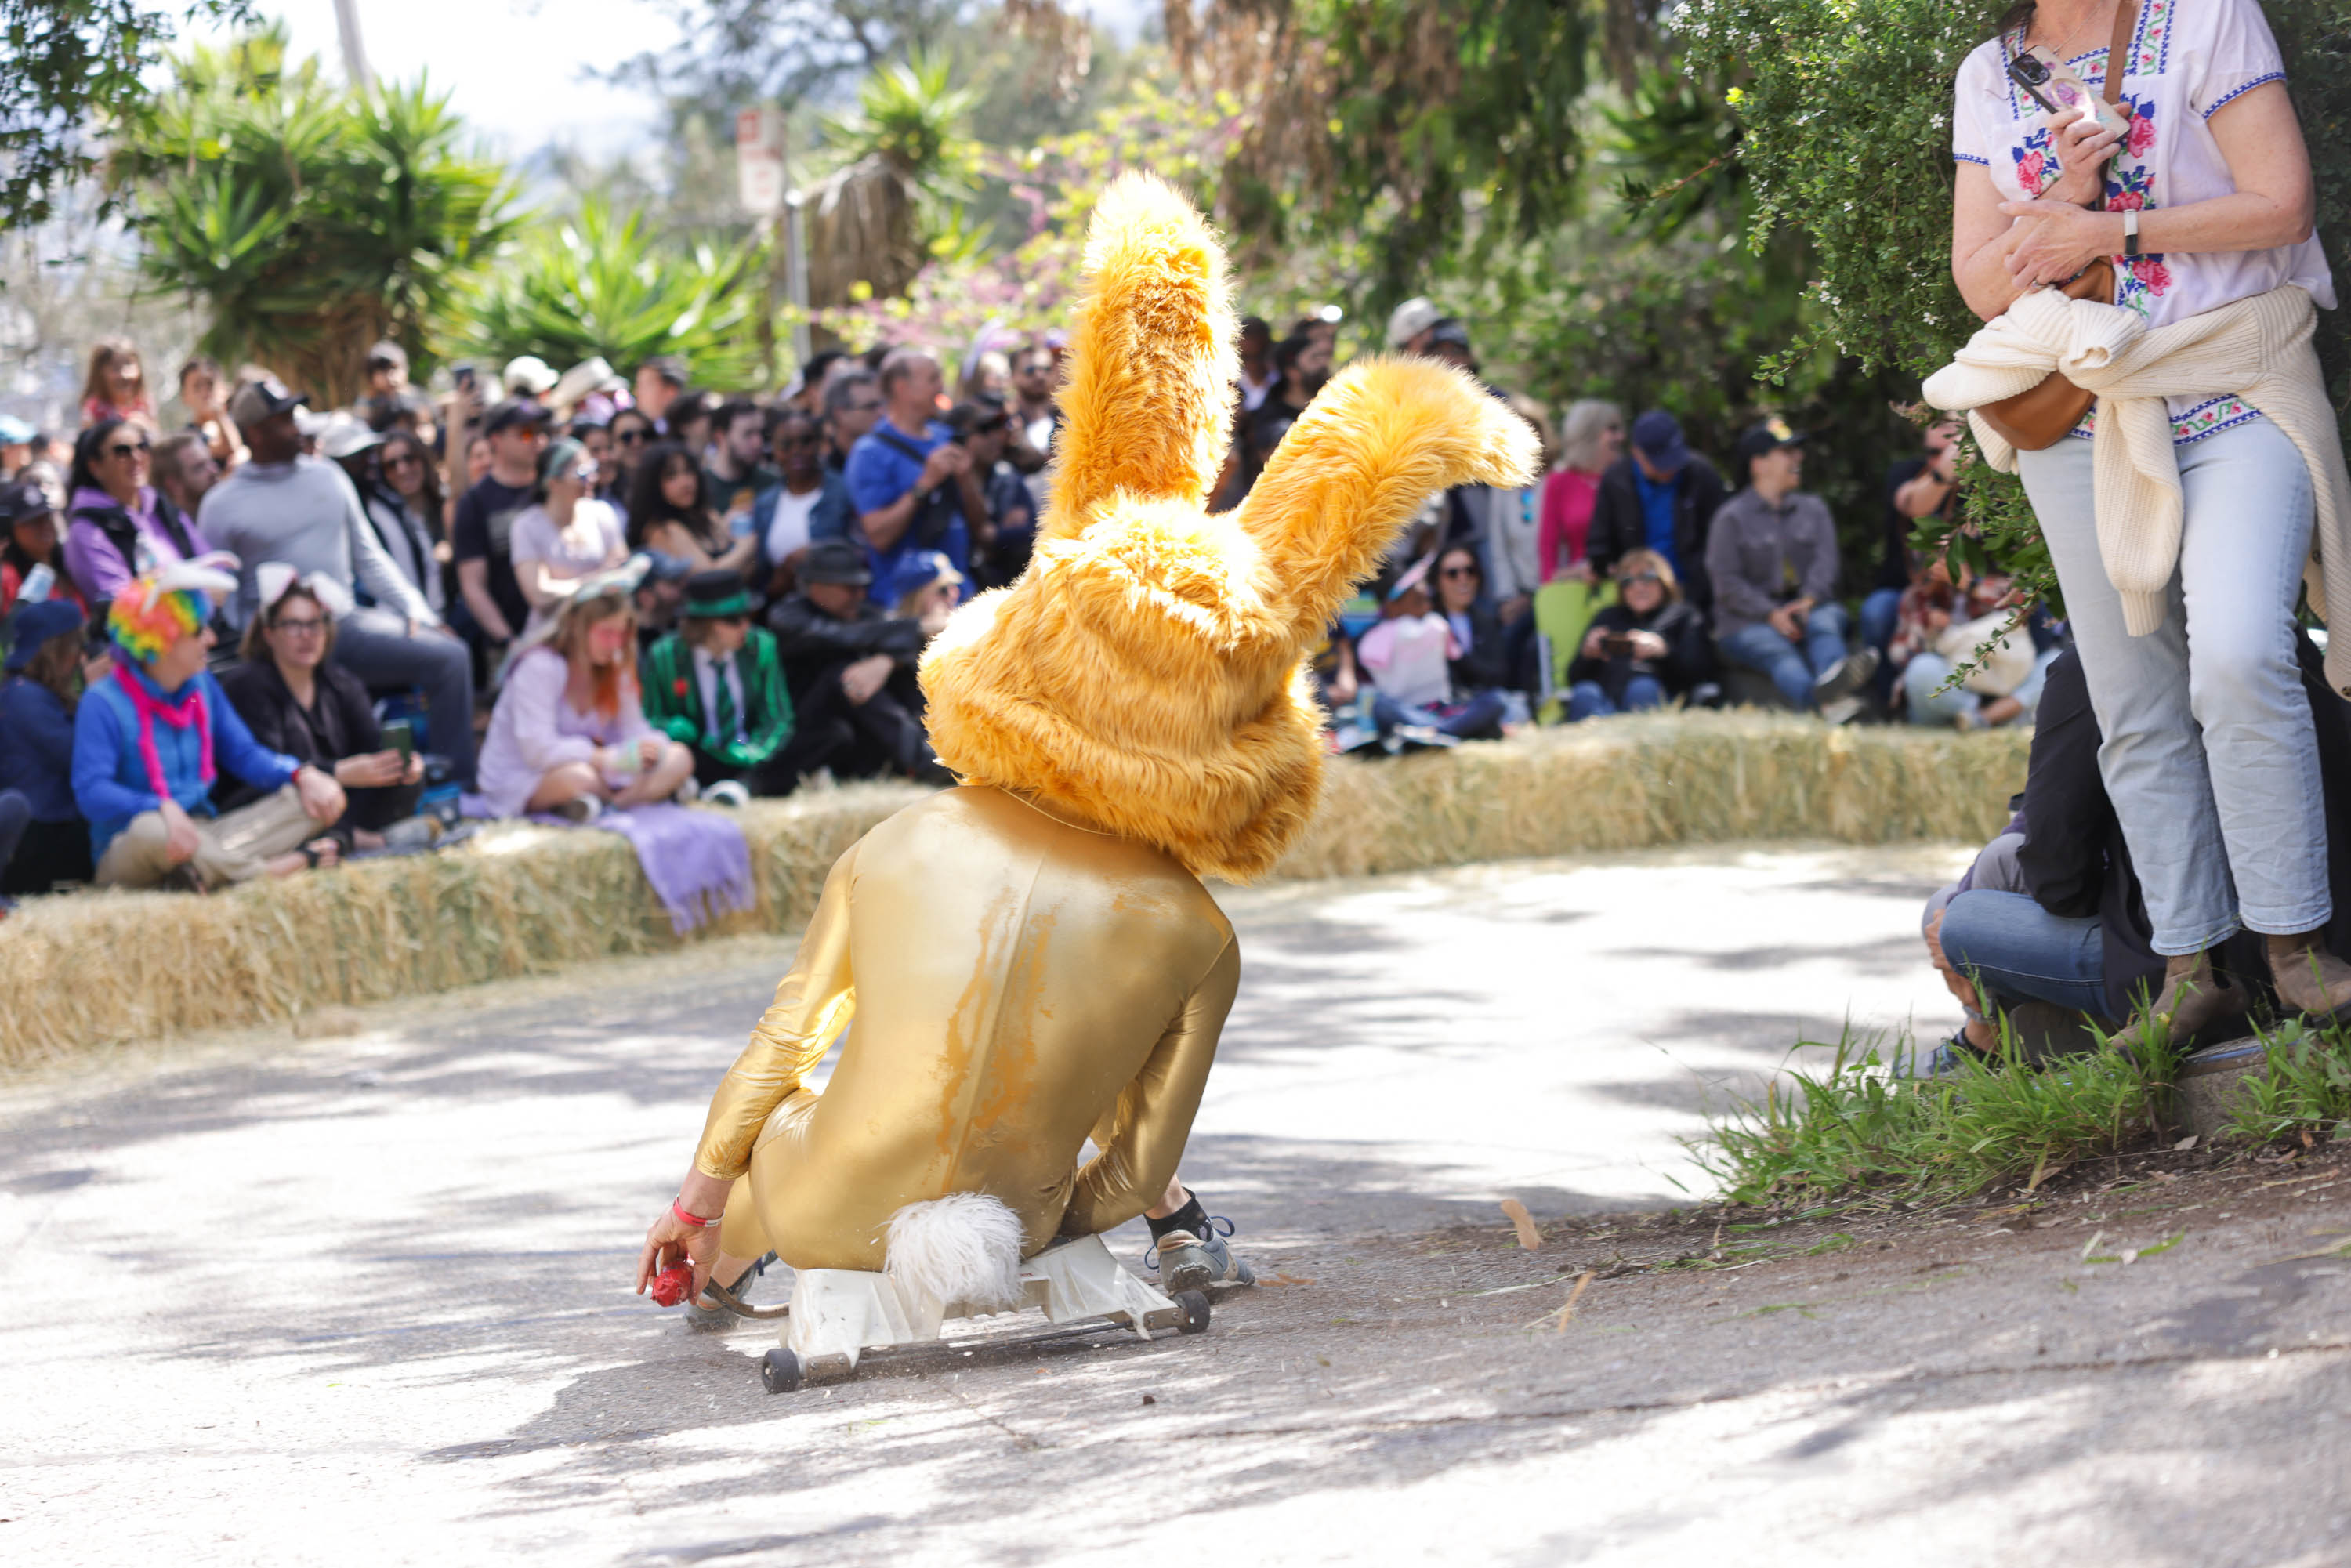 A person in a golden costume with a large fluffy tail is riding a small wheeled device downhill, surrounded by spectators.